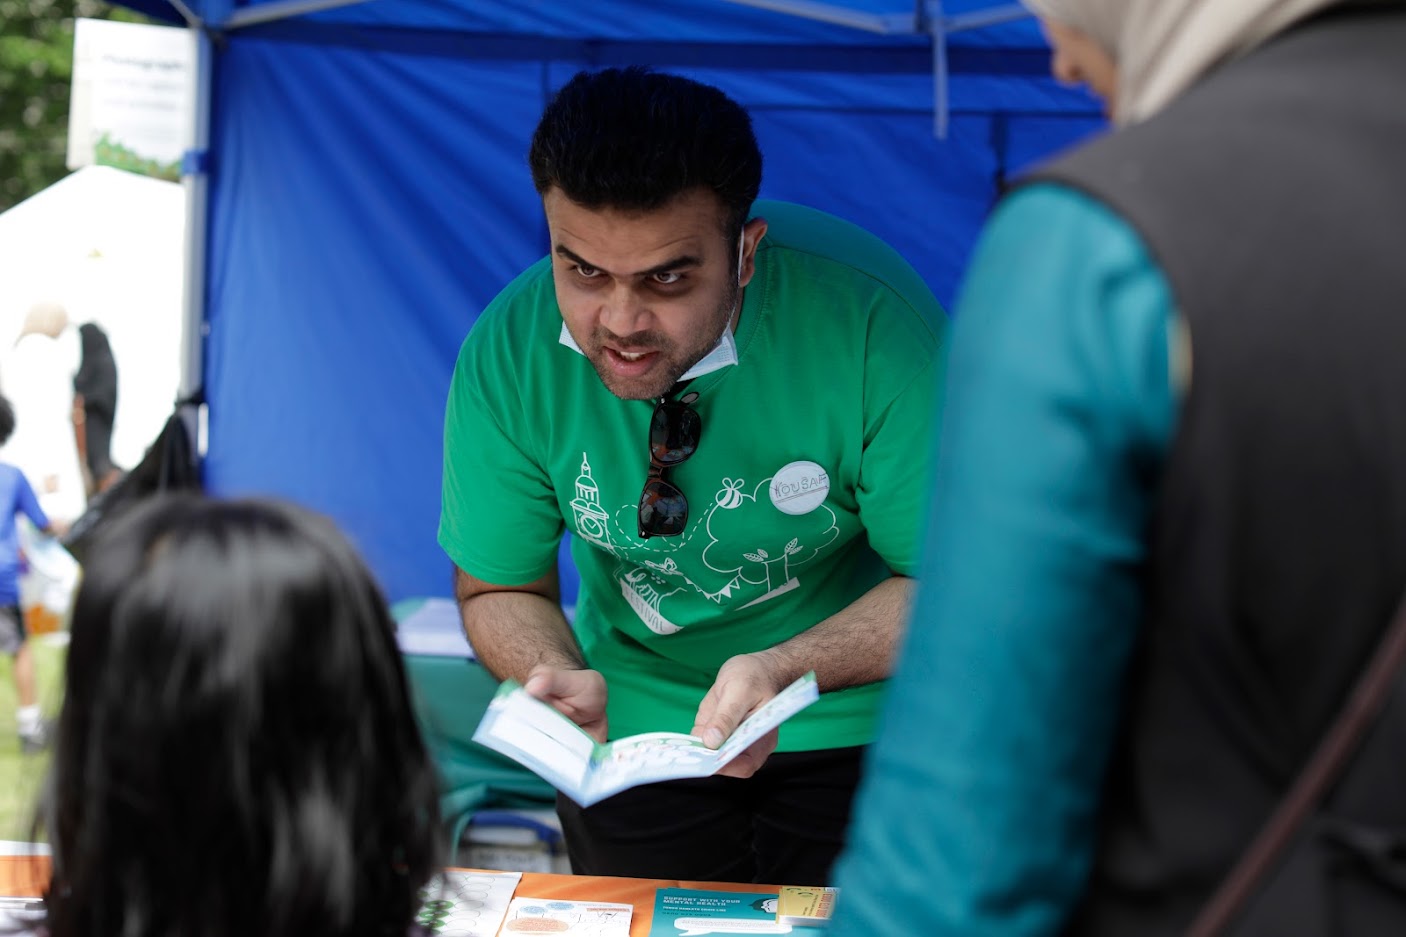 A young man wearing a green Festival T-shirt shows an information leaflet to a child and their grown up